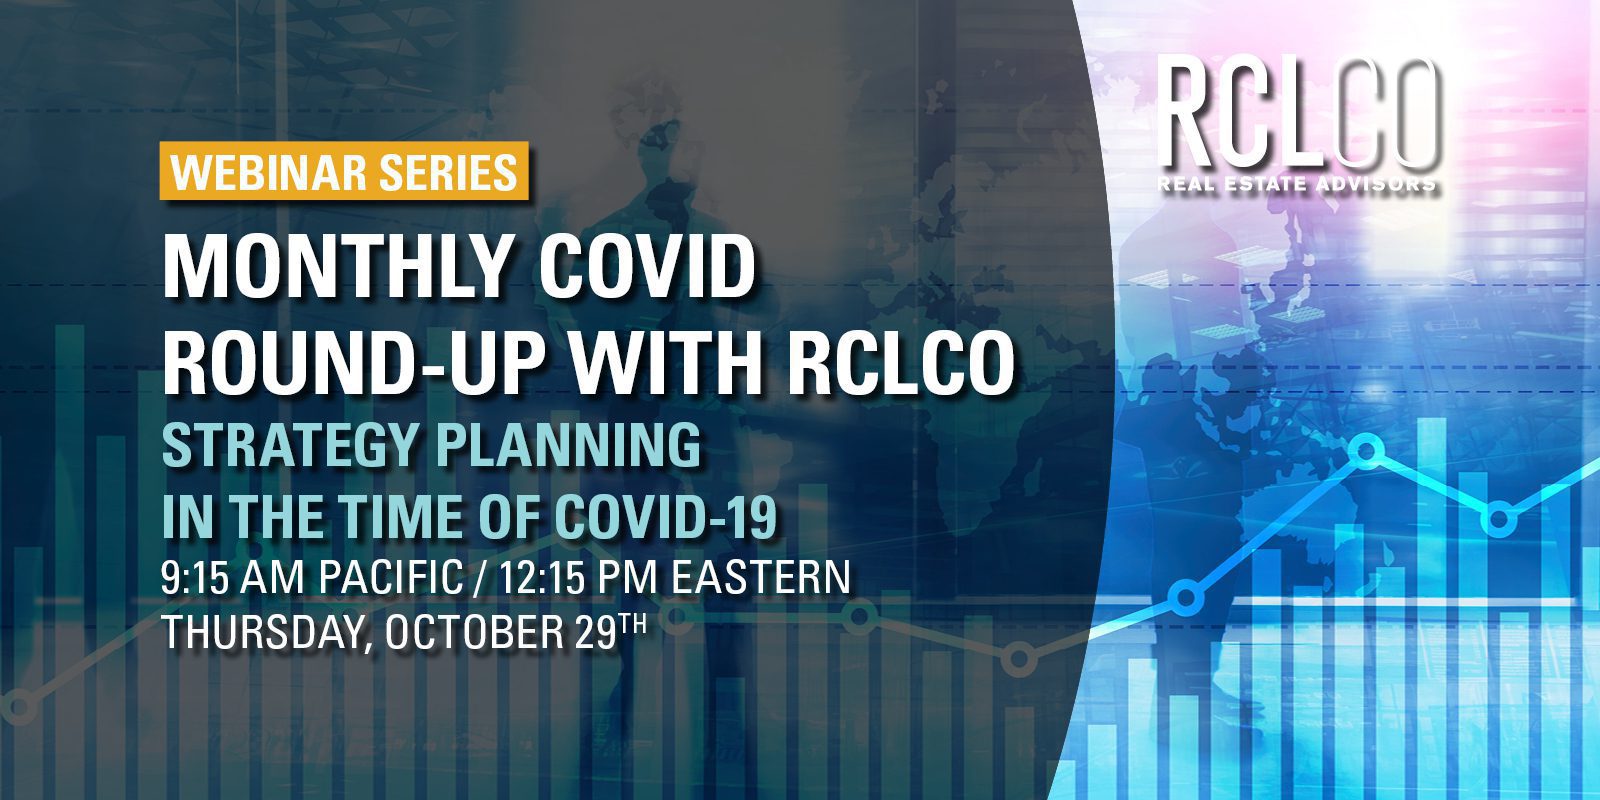 RCLCO COVID Round-Up: October 29, 2020